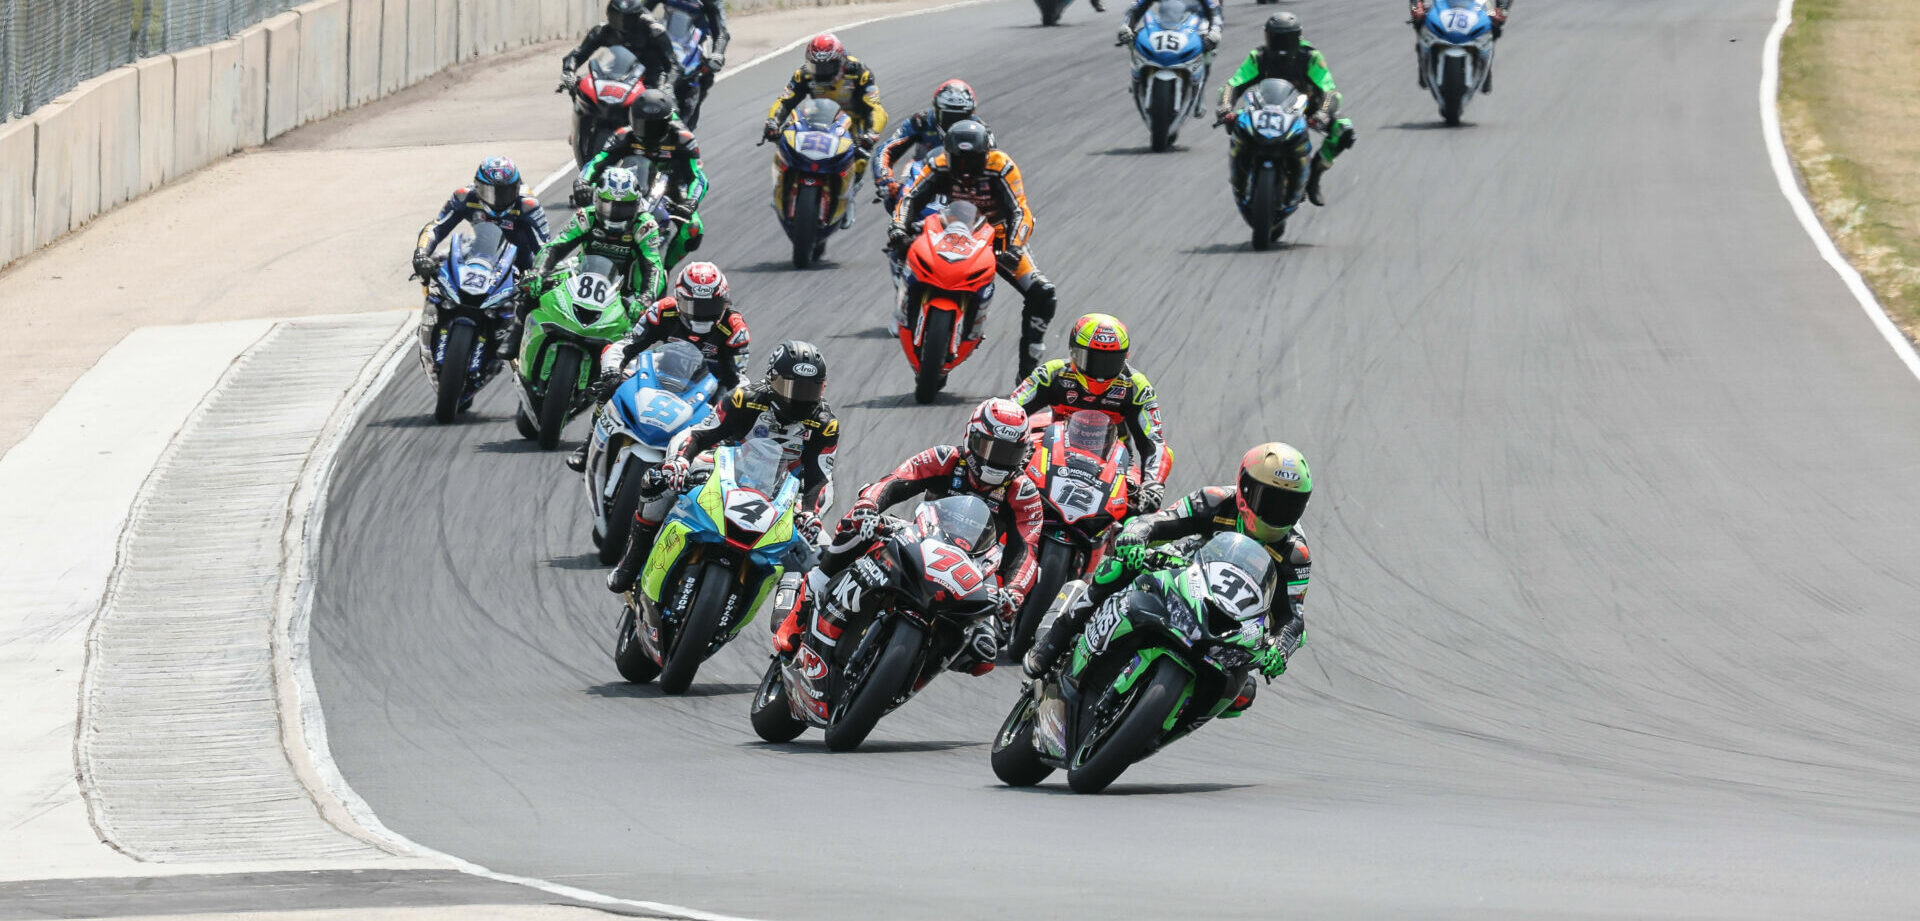 ESPN Latin America and the Star+ platform will continue to bring the MotoAmerica Championship to its Spanish-speaking viewers in Latin America for the coming season. Colombian-born Stefano Mesa (37) is shown leading a group during a MotoAmerica Supersport race in 2023. Photo by Brian J. Nelson.